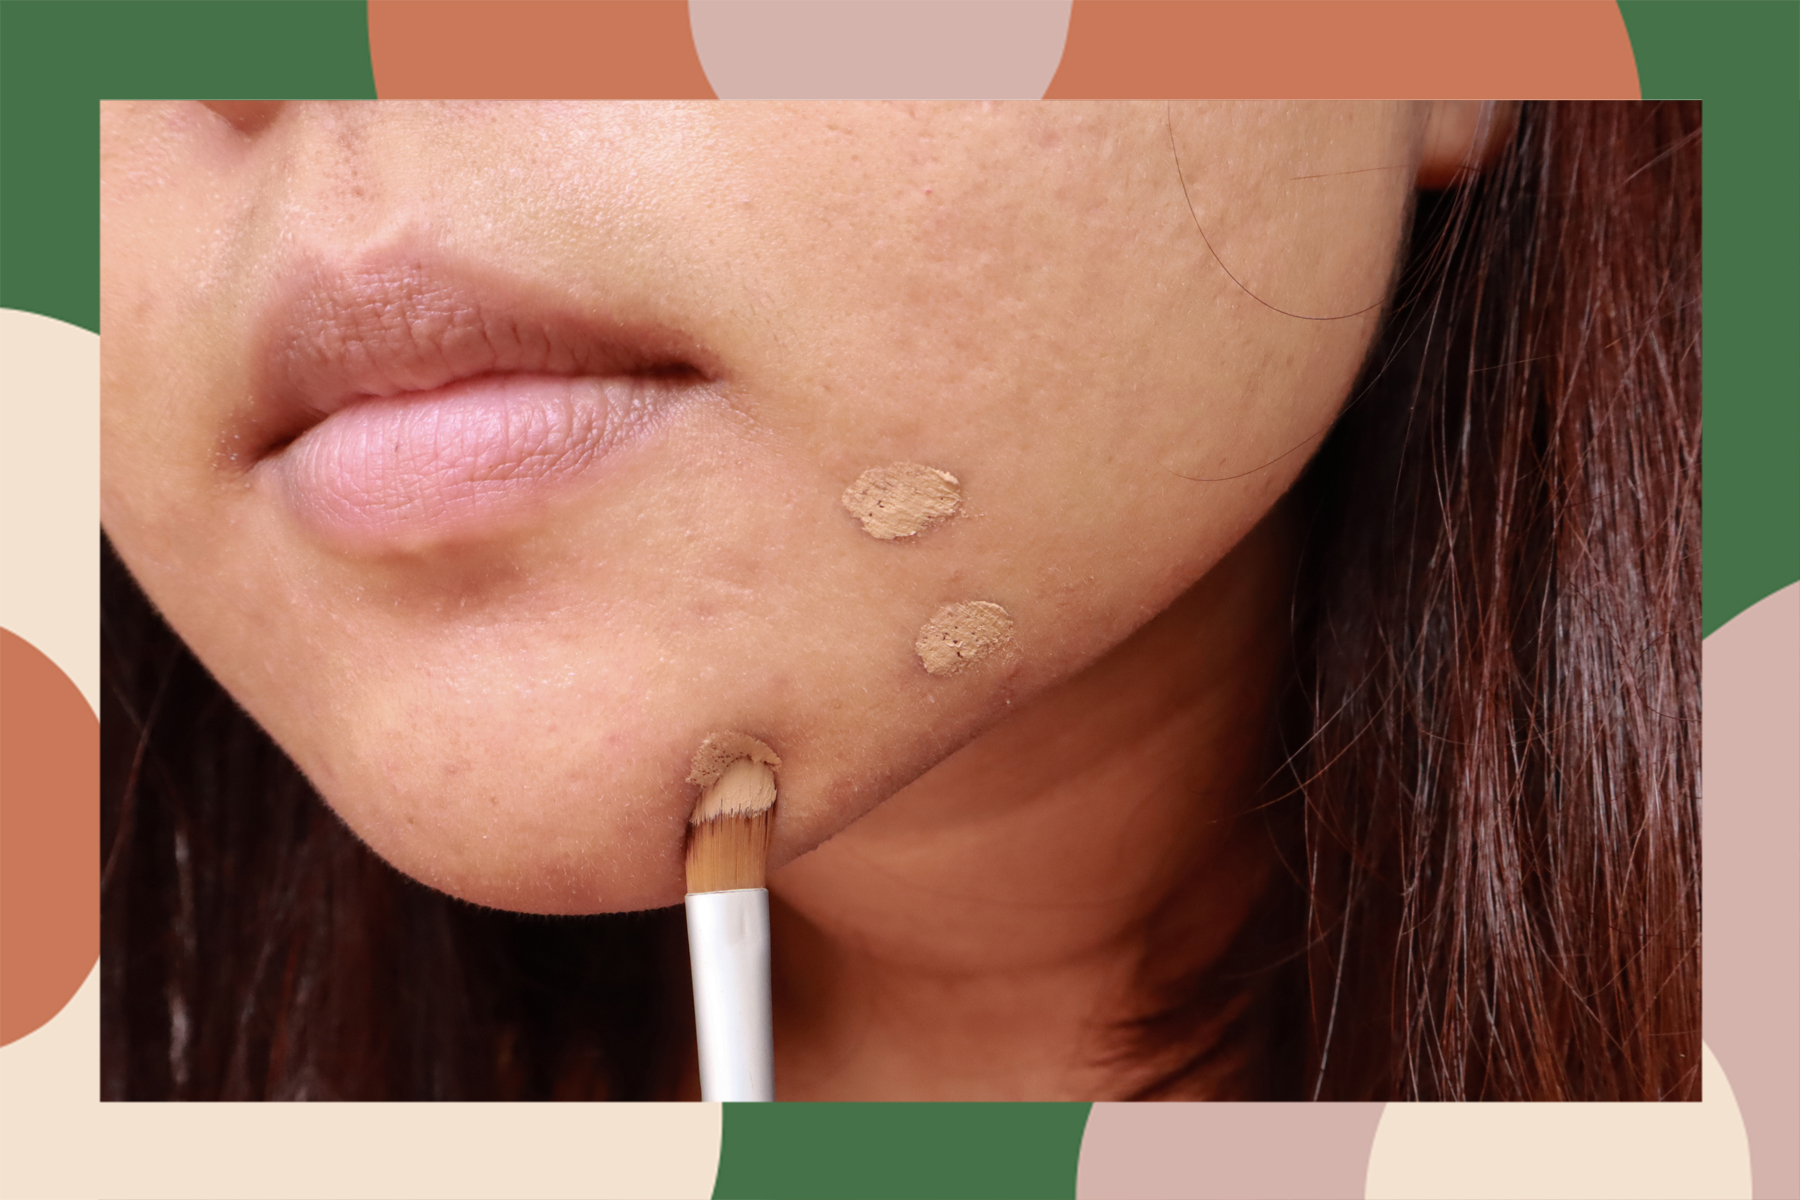 Cover A Pimple And Other Types Of Acne